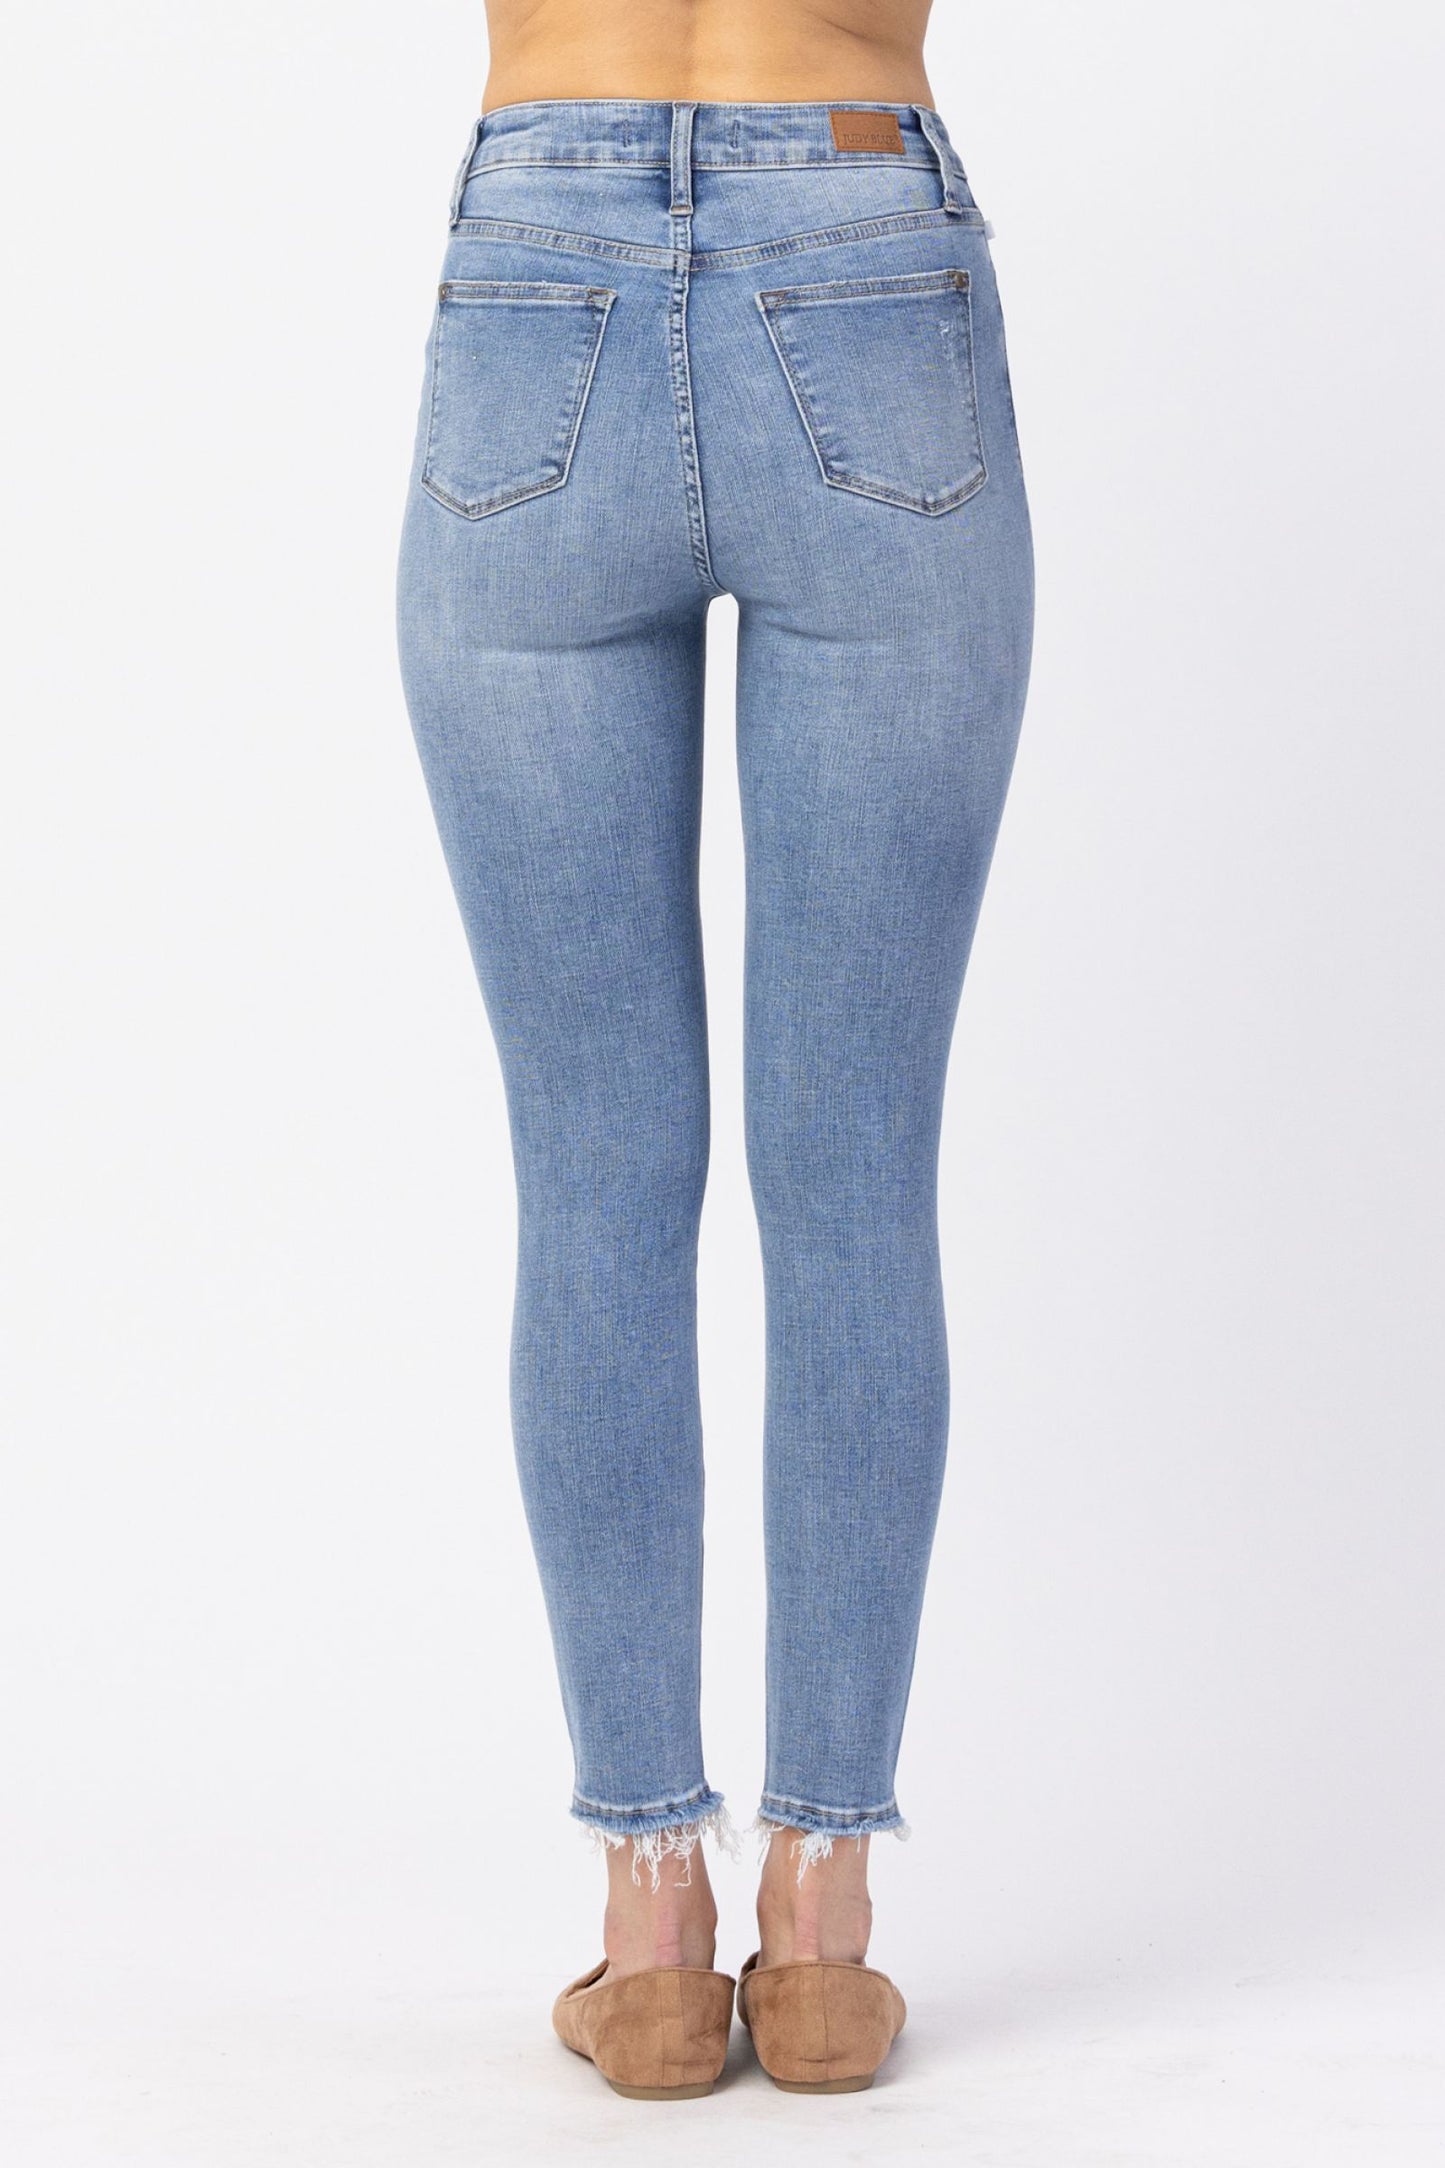 JUDY BLUE® HI-RISE BUTTON FLY SKINNY